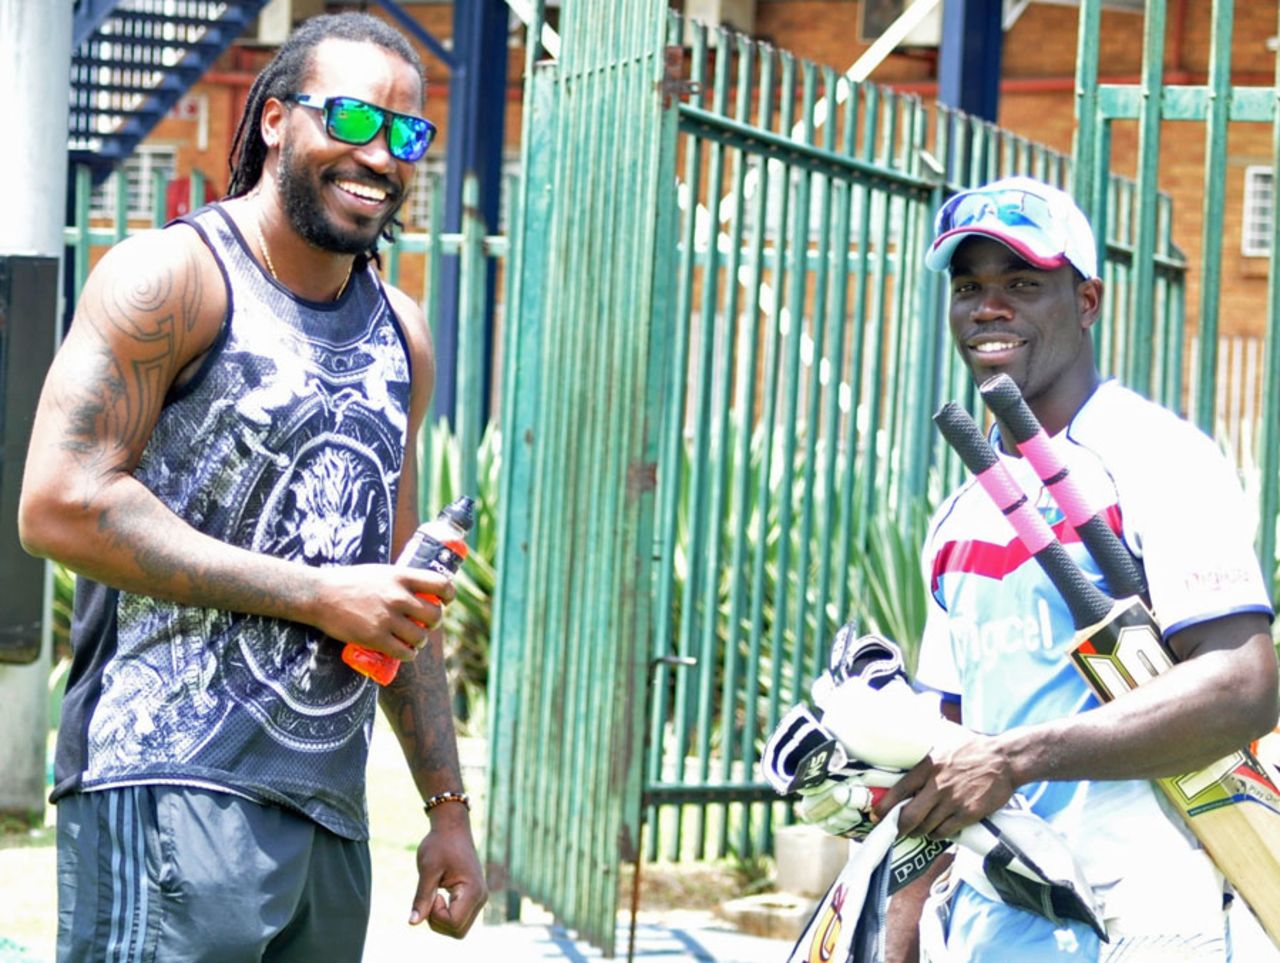 Chris Gayle and Chadwick Walton at West Indies' training session, Johannesburg, December 5, 2014